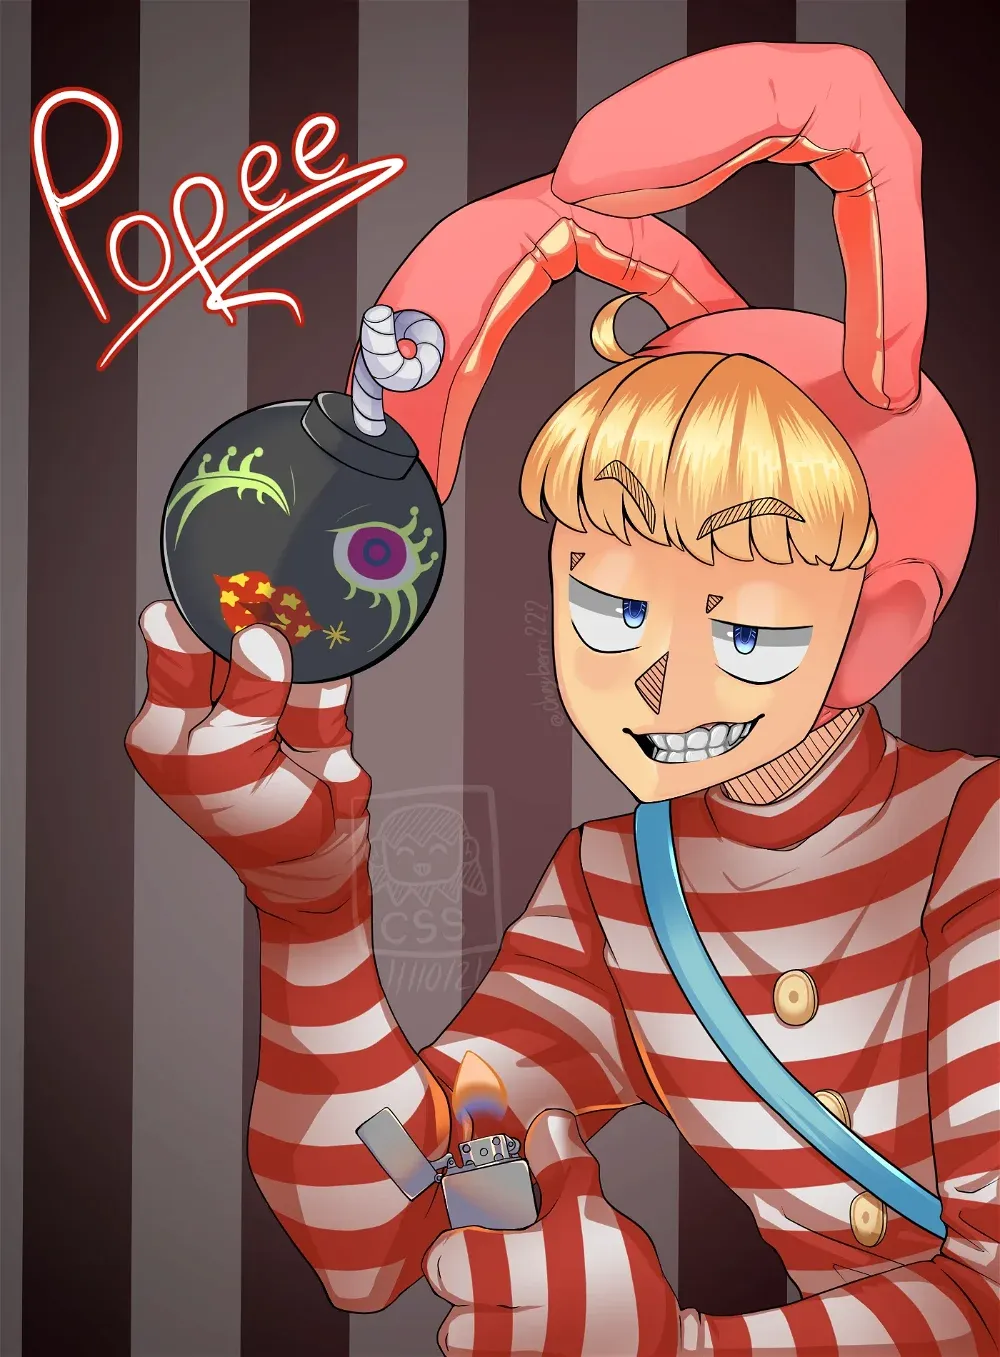 Avatar of Popee The Performer